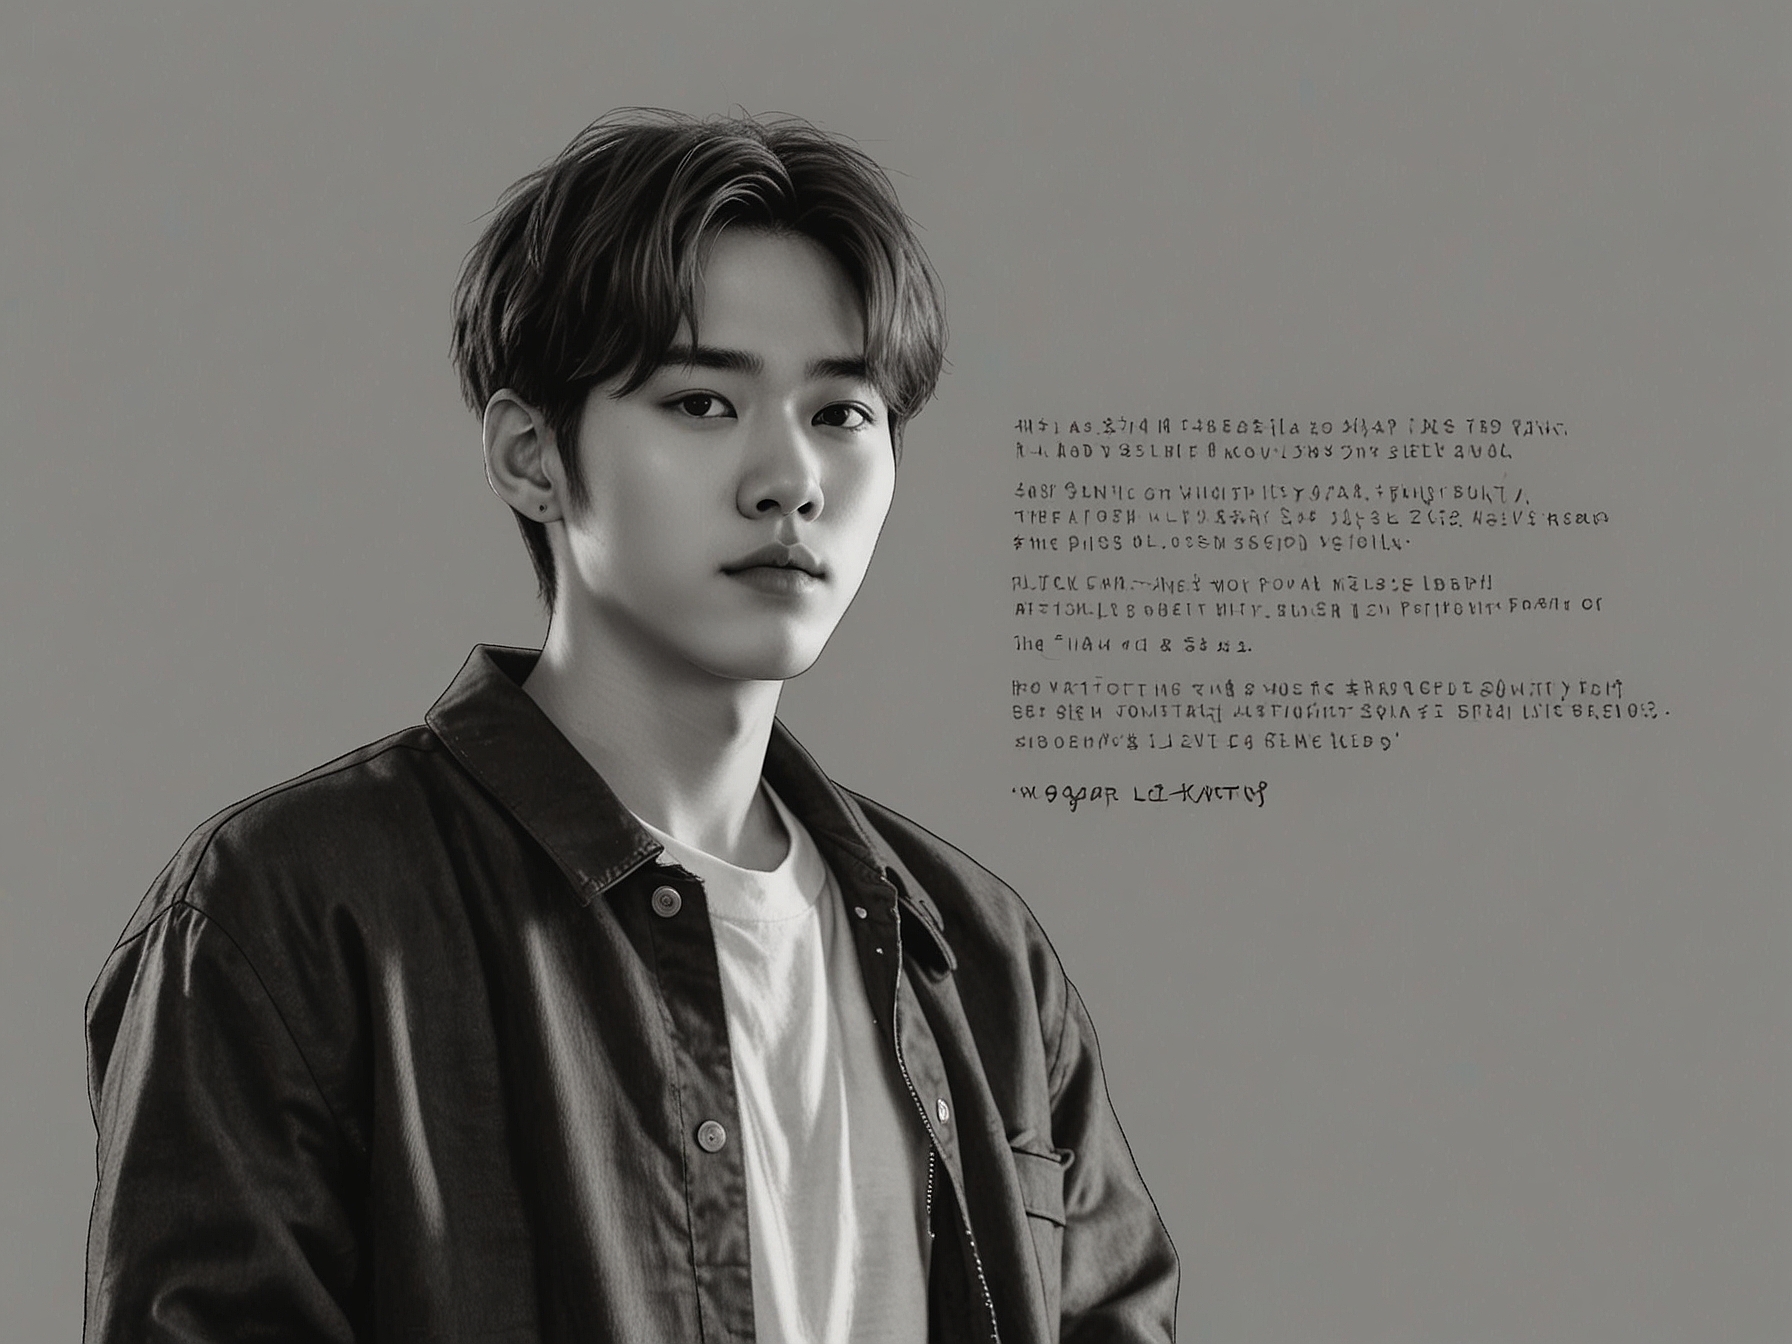 Image of Baekhyun sharing a heartfelt message on social media, expressing gratitude towards EXO-Ls while inadvertently sparking controversy over fan exploitation.